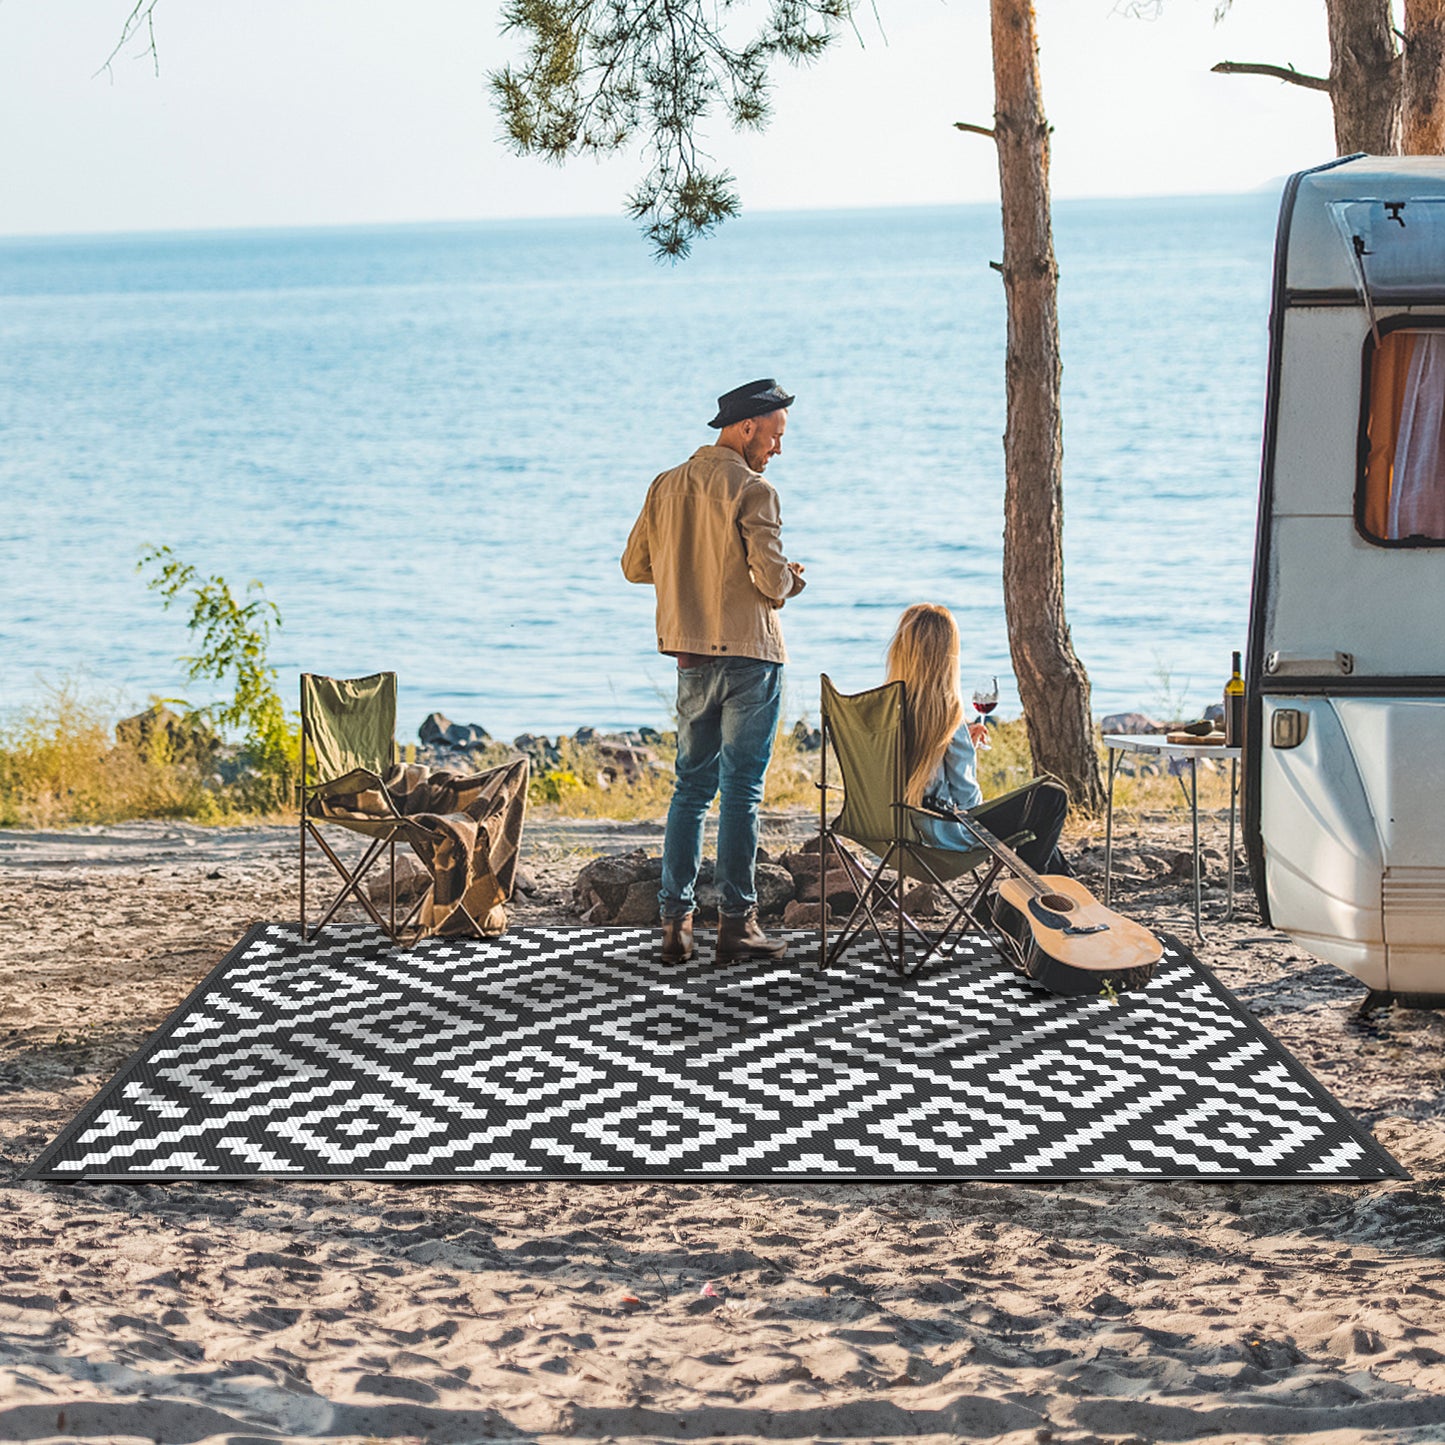 GENIMO Outdoor Rug for Patio Clearance,Waterproof Mat,Reversible Plastic Camping Rugs,Rv,Deck,Porch,Camper,Balcony,Backyard